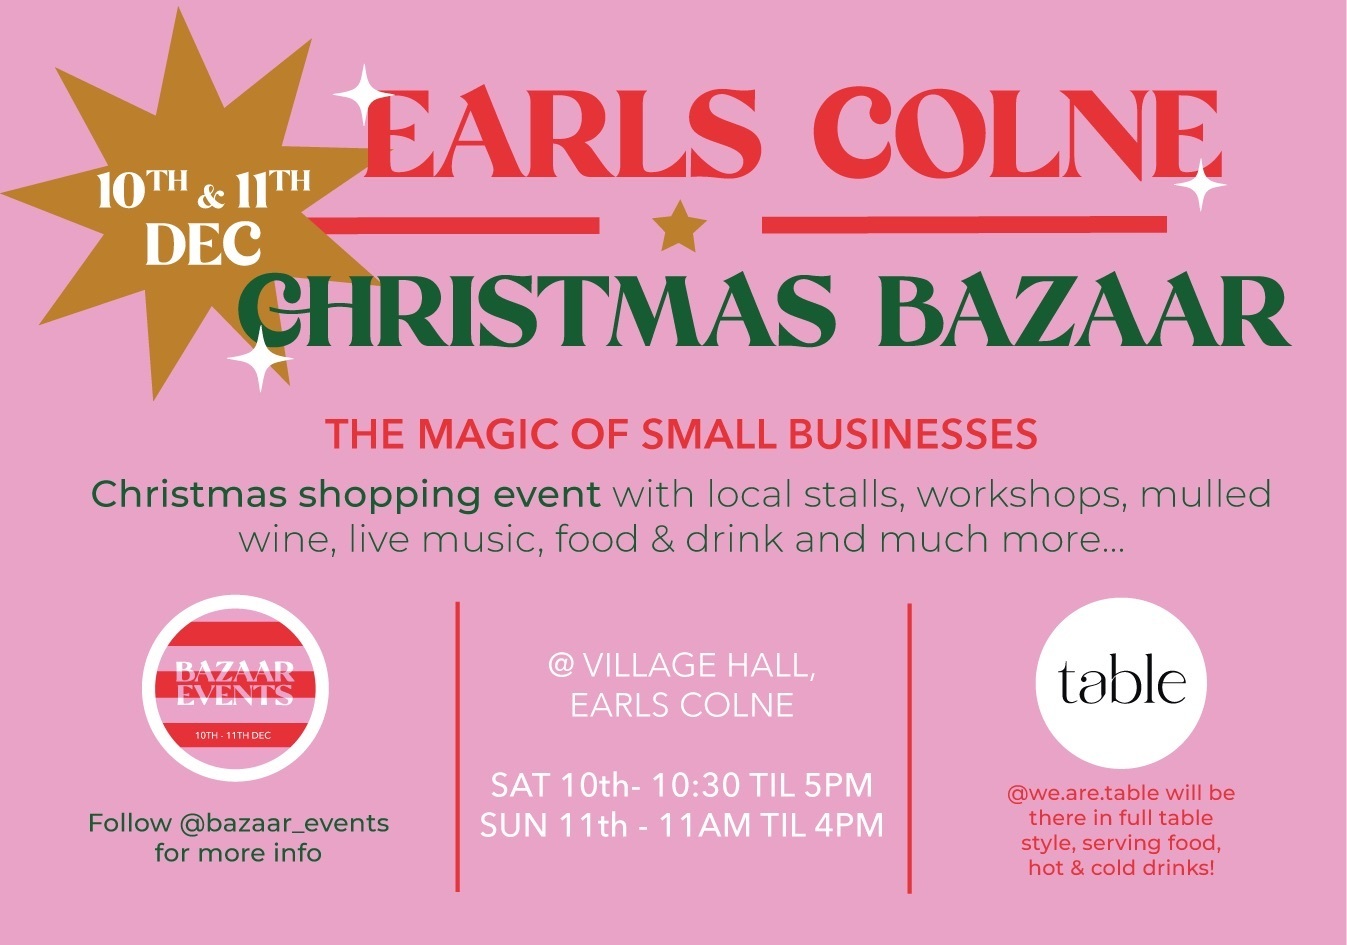 Bazaar Events 10th and 11th December Earls Colne Village Hall York Road CO6 2RN, Earls Colne, England, United Kingdom